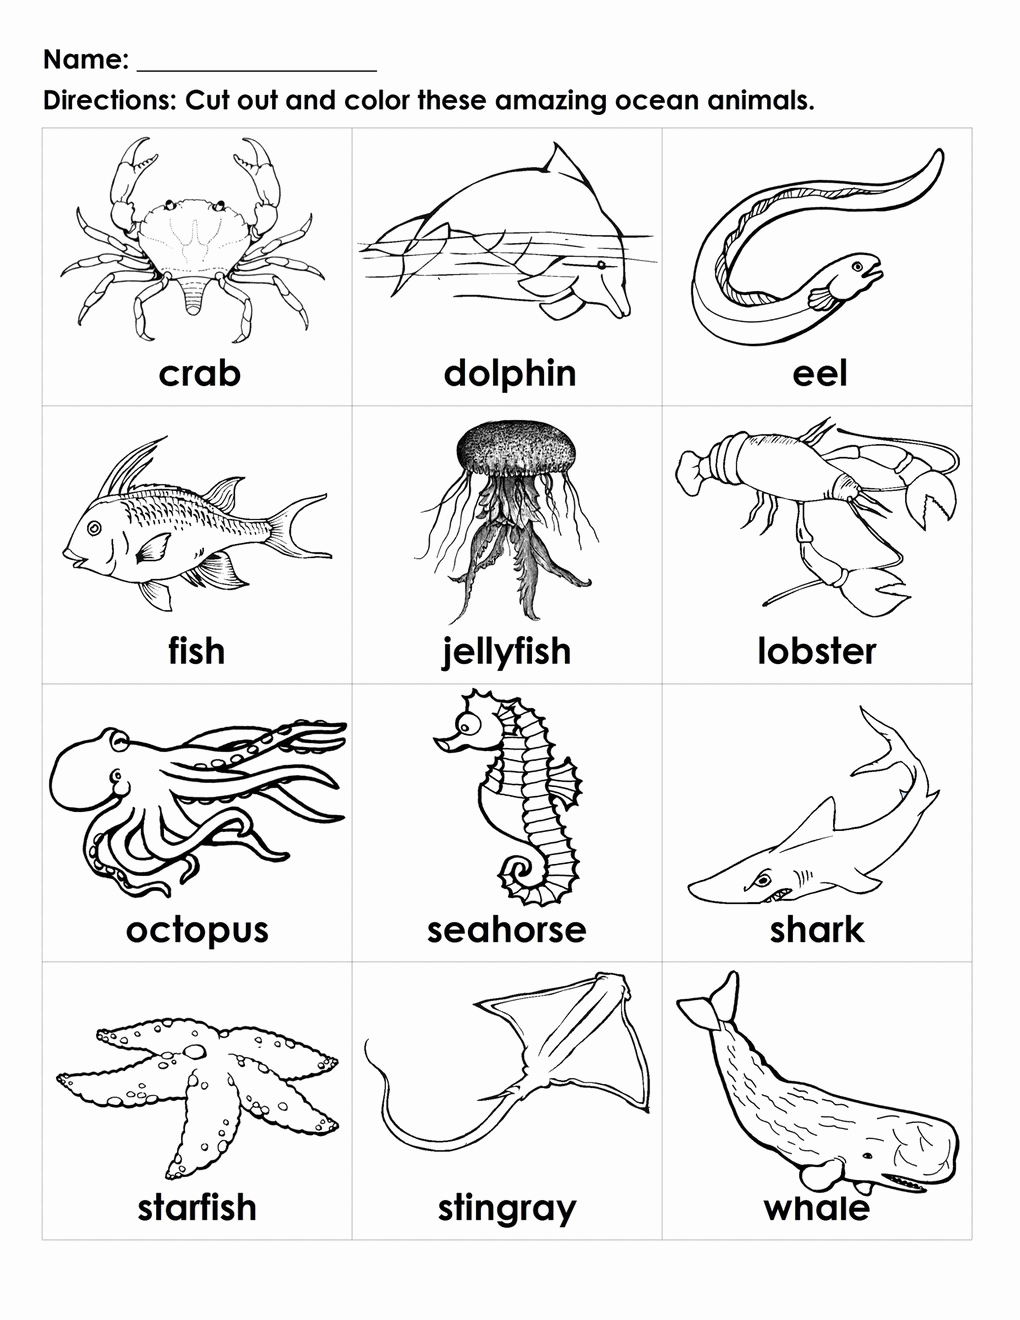 Free Printable Ecosystem Worksheets Unique Ocean Ecosystem Drawing at Getdrawings